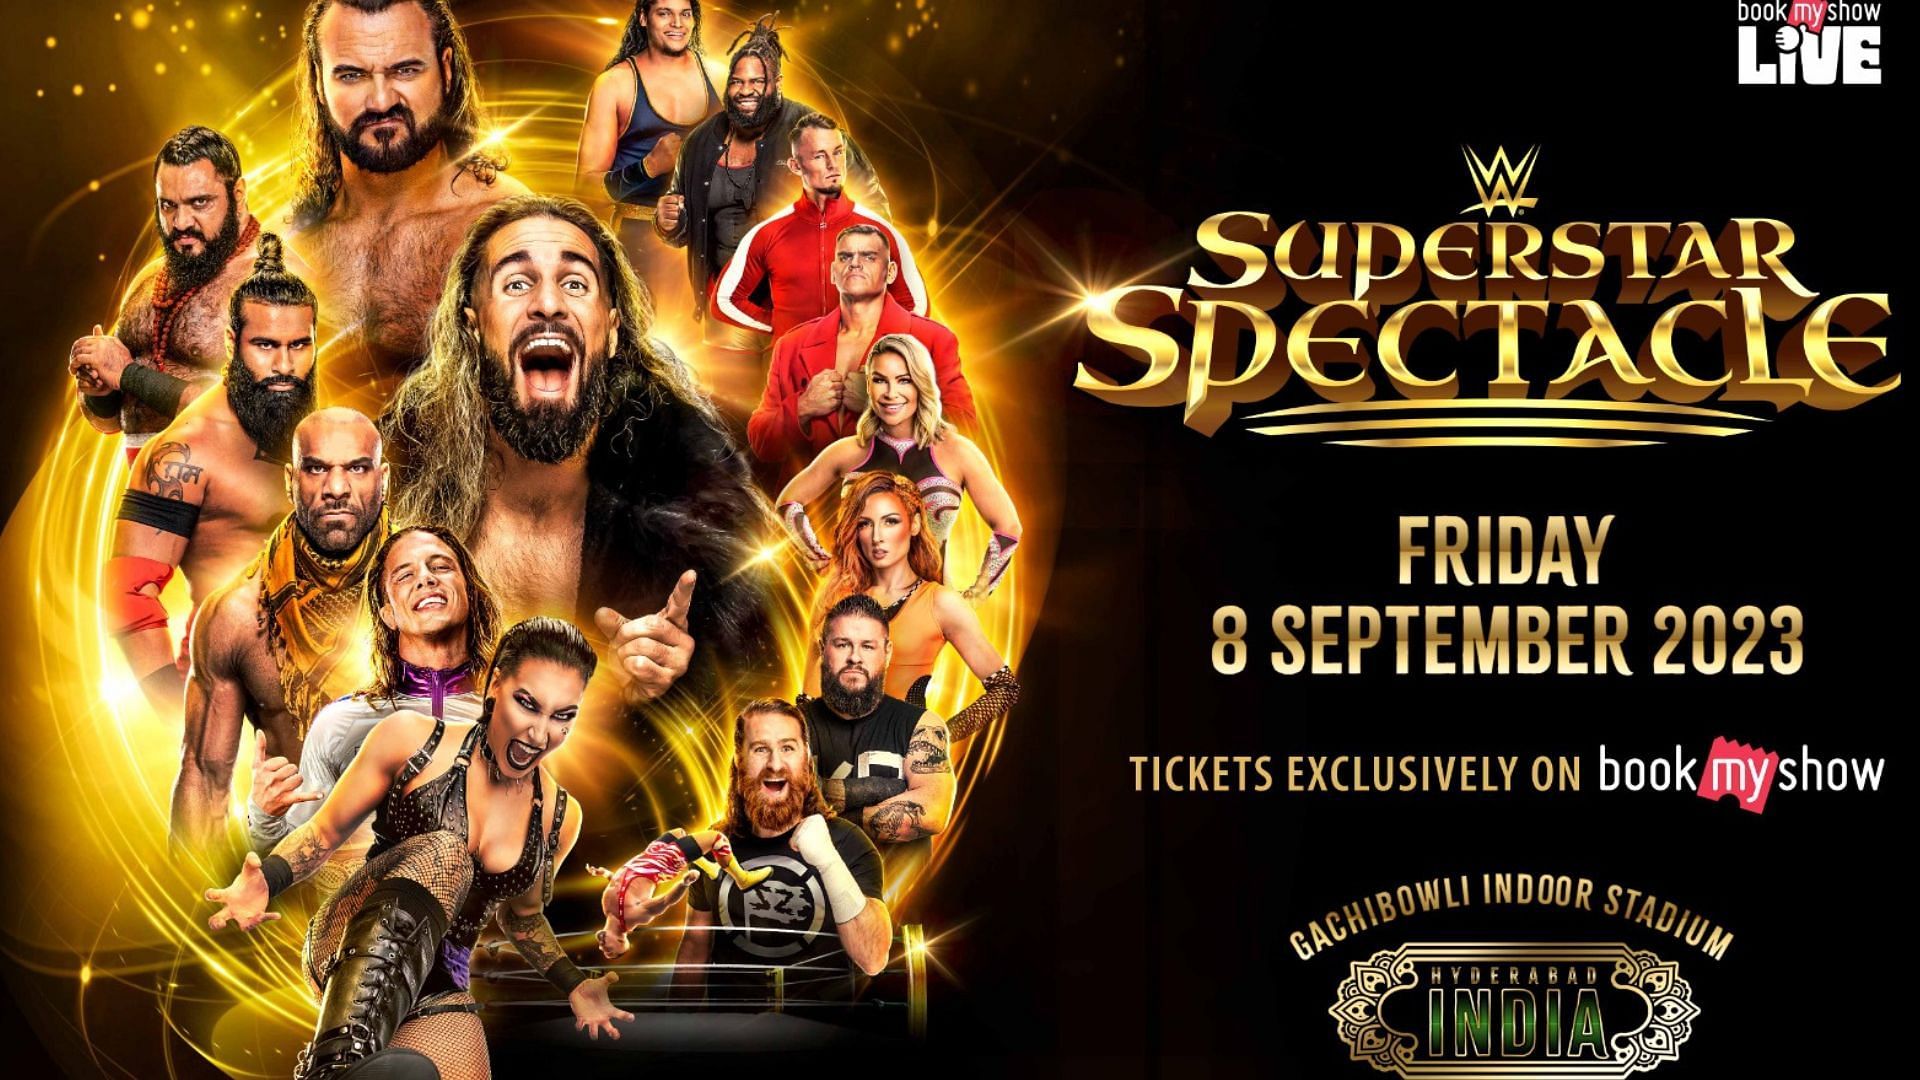 WWE is putting on an incredible show in India next month